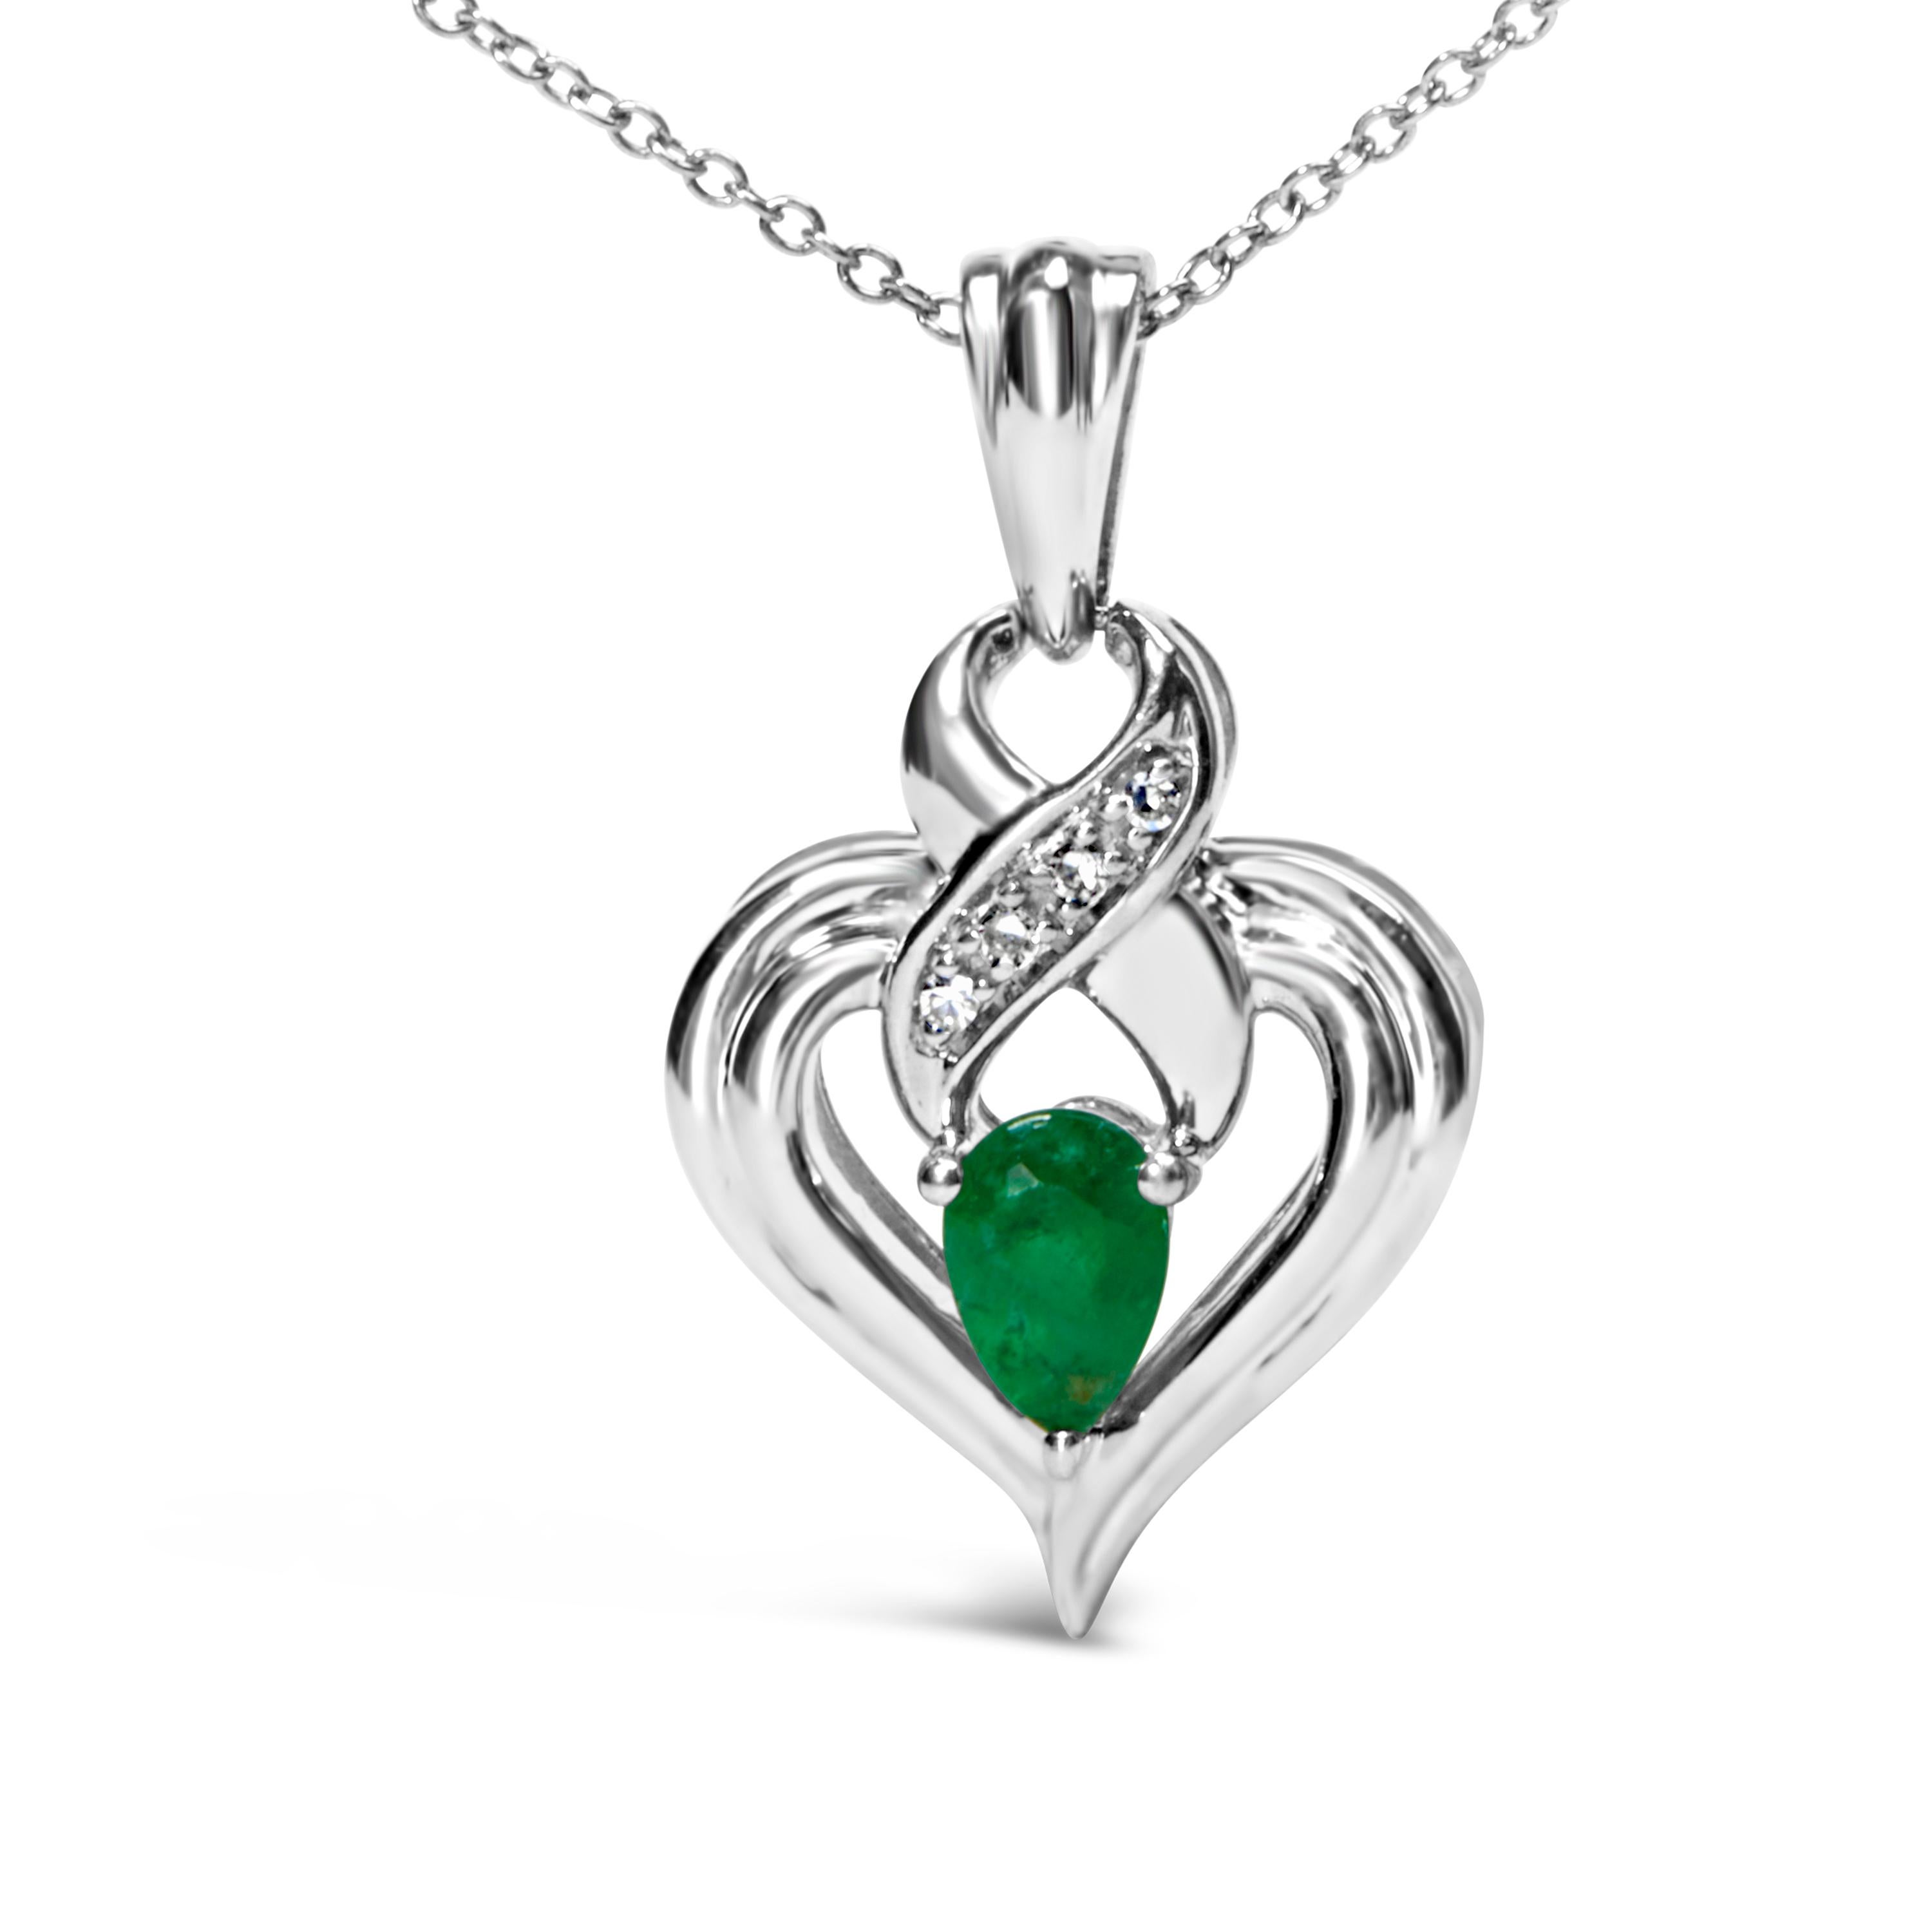 Introducing a captivating masterpiece that will steal your heart! This exquisite .925 Sterling Silver necklace showcases a stunning 6x4mm pear-shaped emerald gemstone, radiating a mesmerizing shade of green. Adorned with a delicate diamond accent